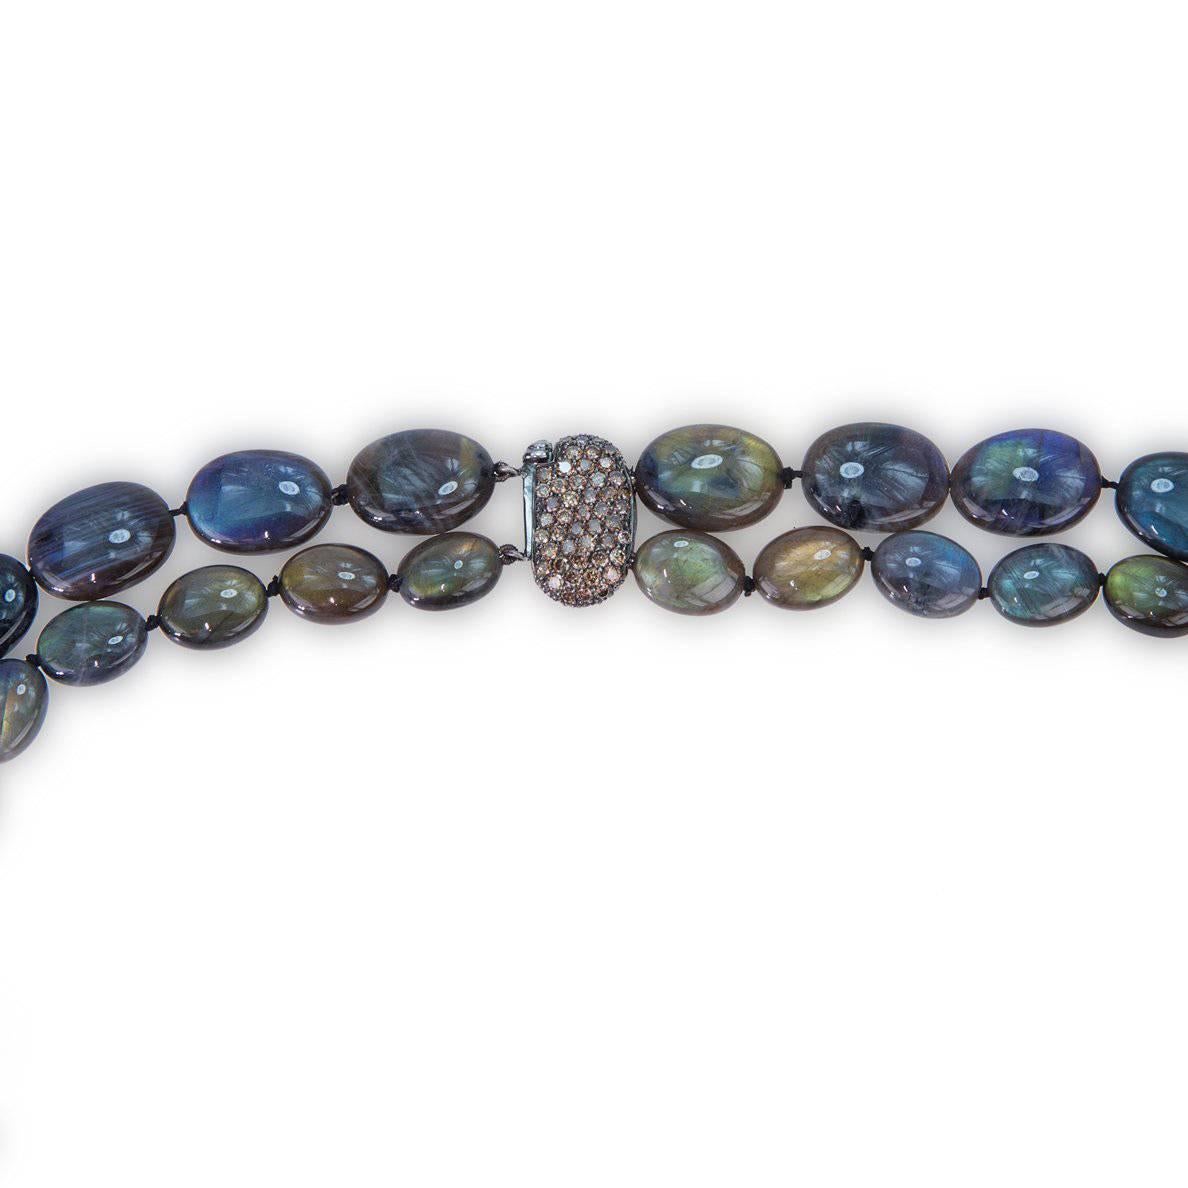 A "Samuel Getz" Spectrolite (Labradorite) Bead Necklace Featuring [27] 16 x 12 mm. and [41] 12 x 9 mm. Oval Shaped Beads Strung and Mounted on a Double Sided 18 Karat White Gold Clasp Pavé Set with 105 Cognac Colored Diamonds Weighting a